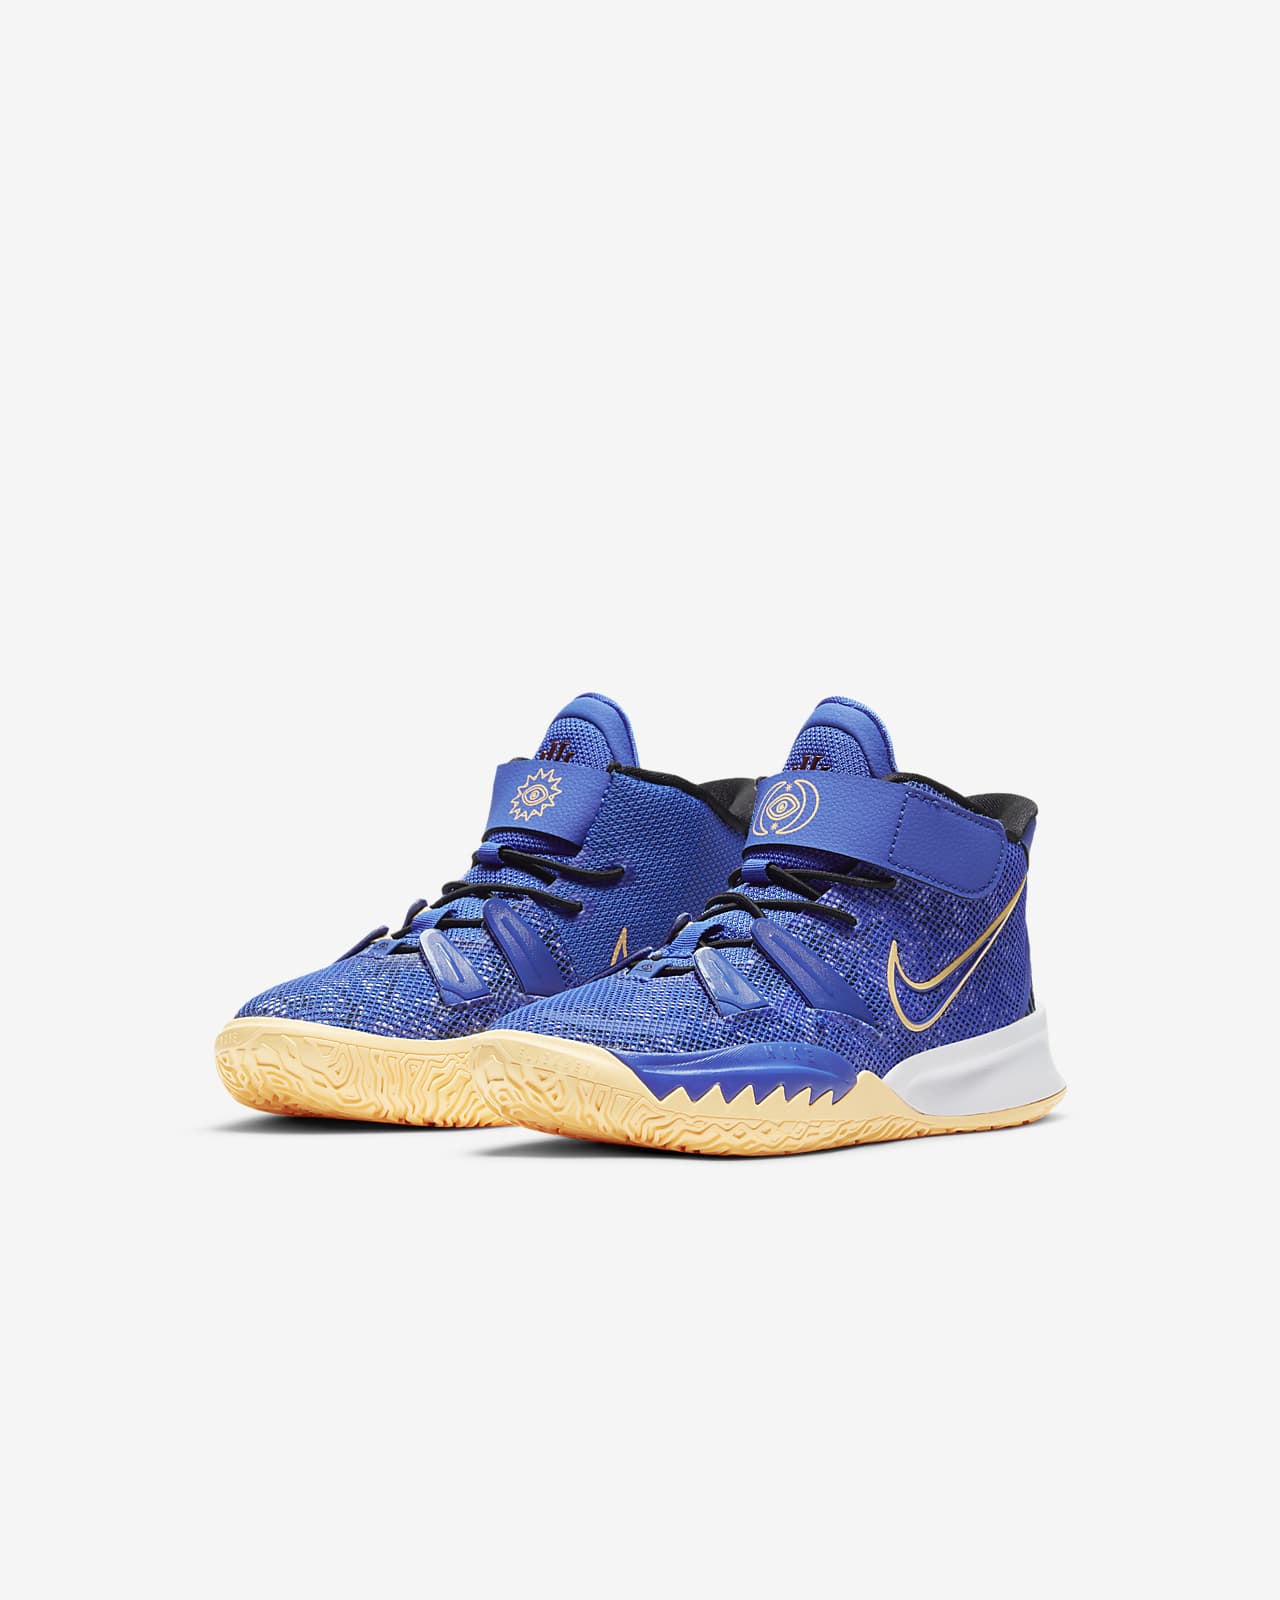 kyrie shoes toddler